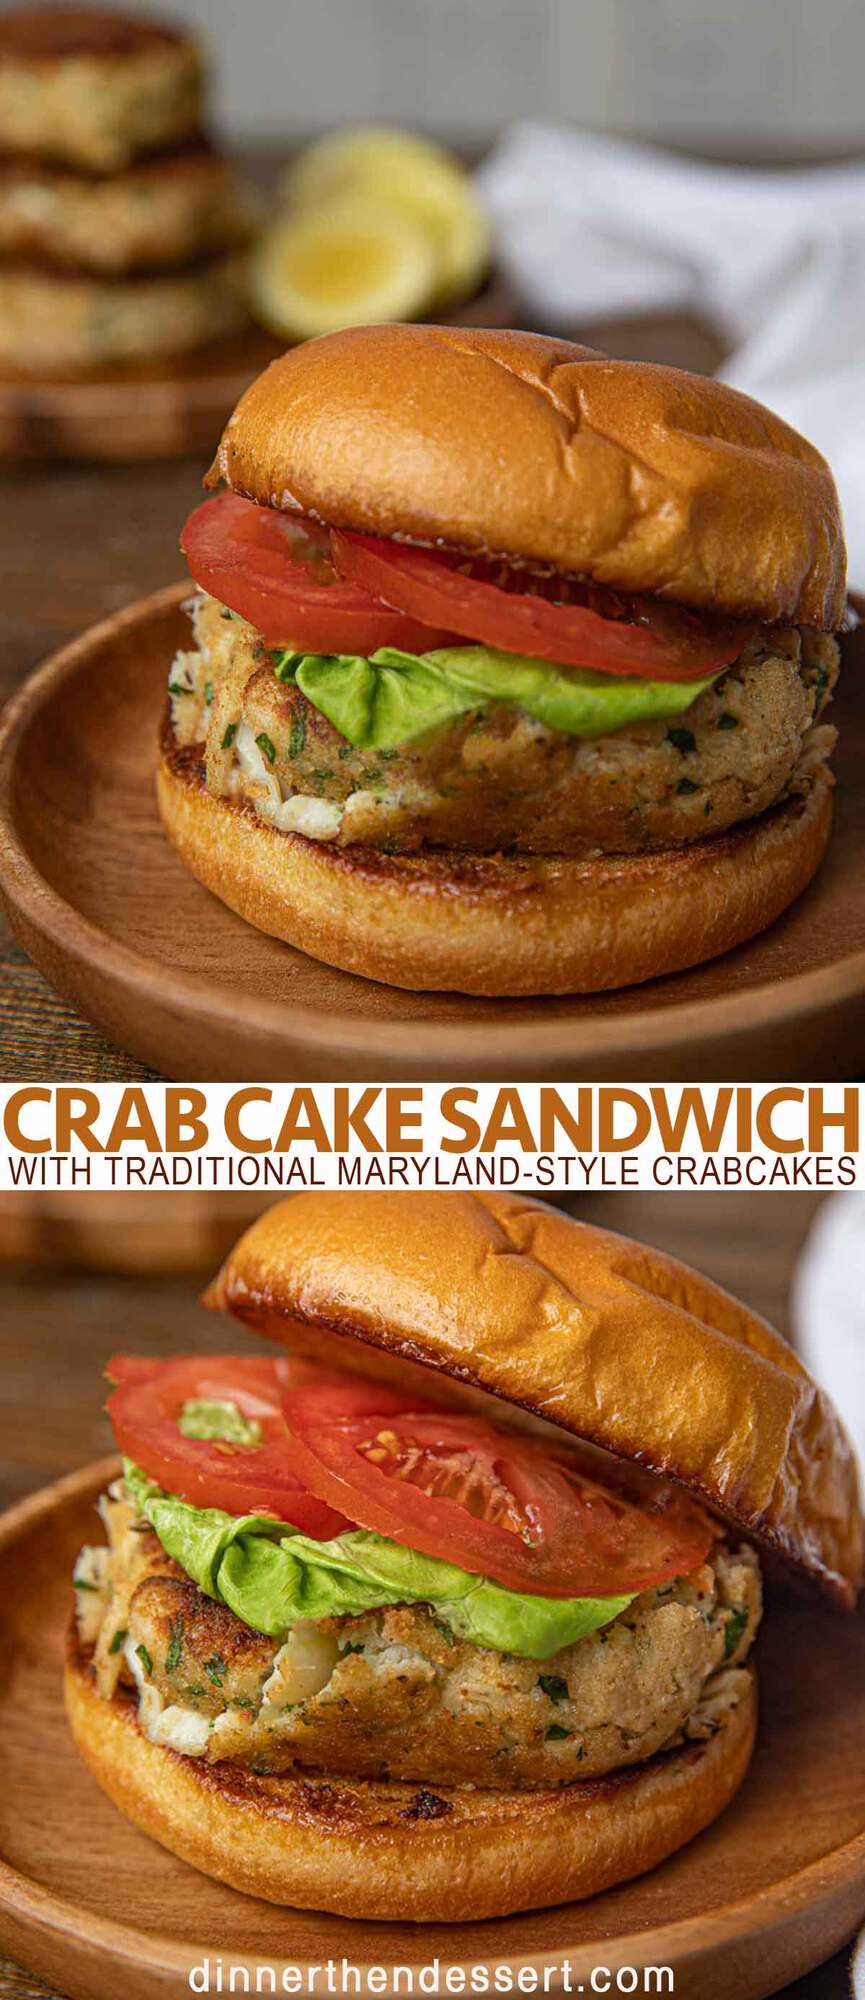 Mini Crab Cake Sandwiches with Bacon Lettuce and Tomato